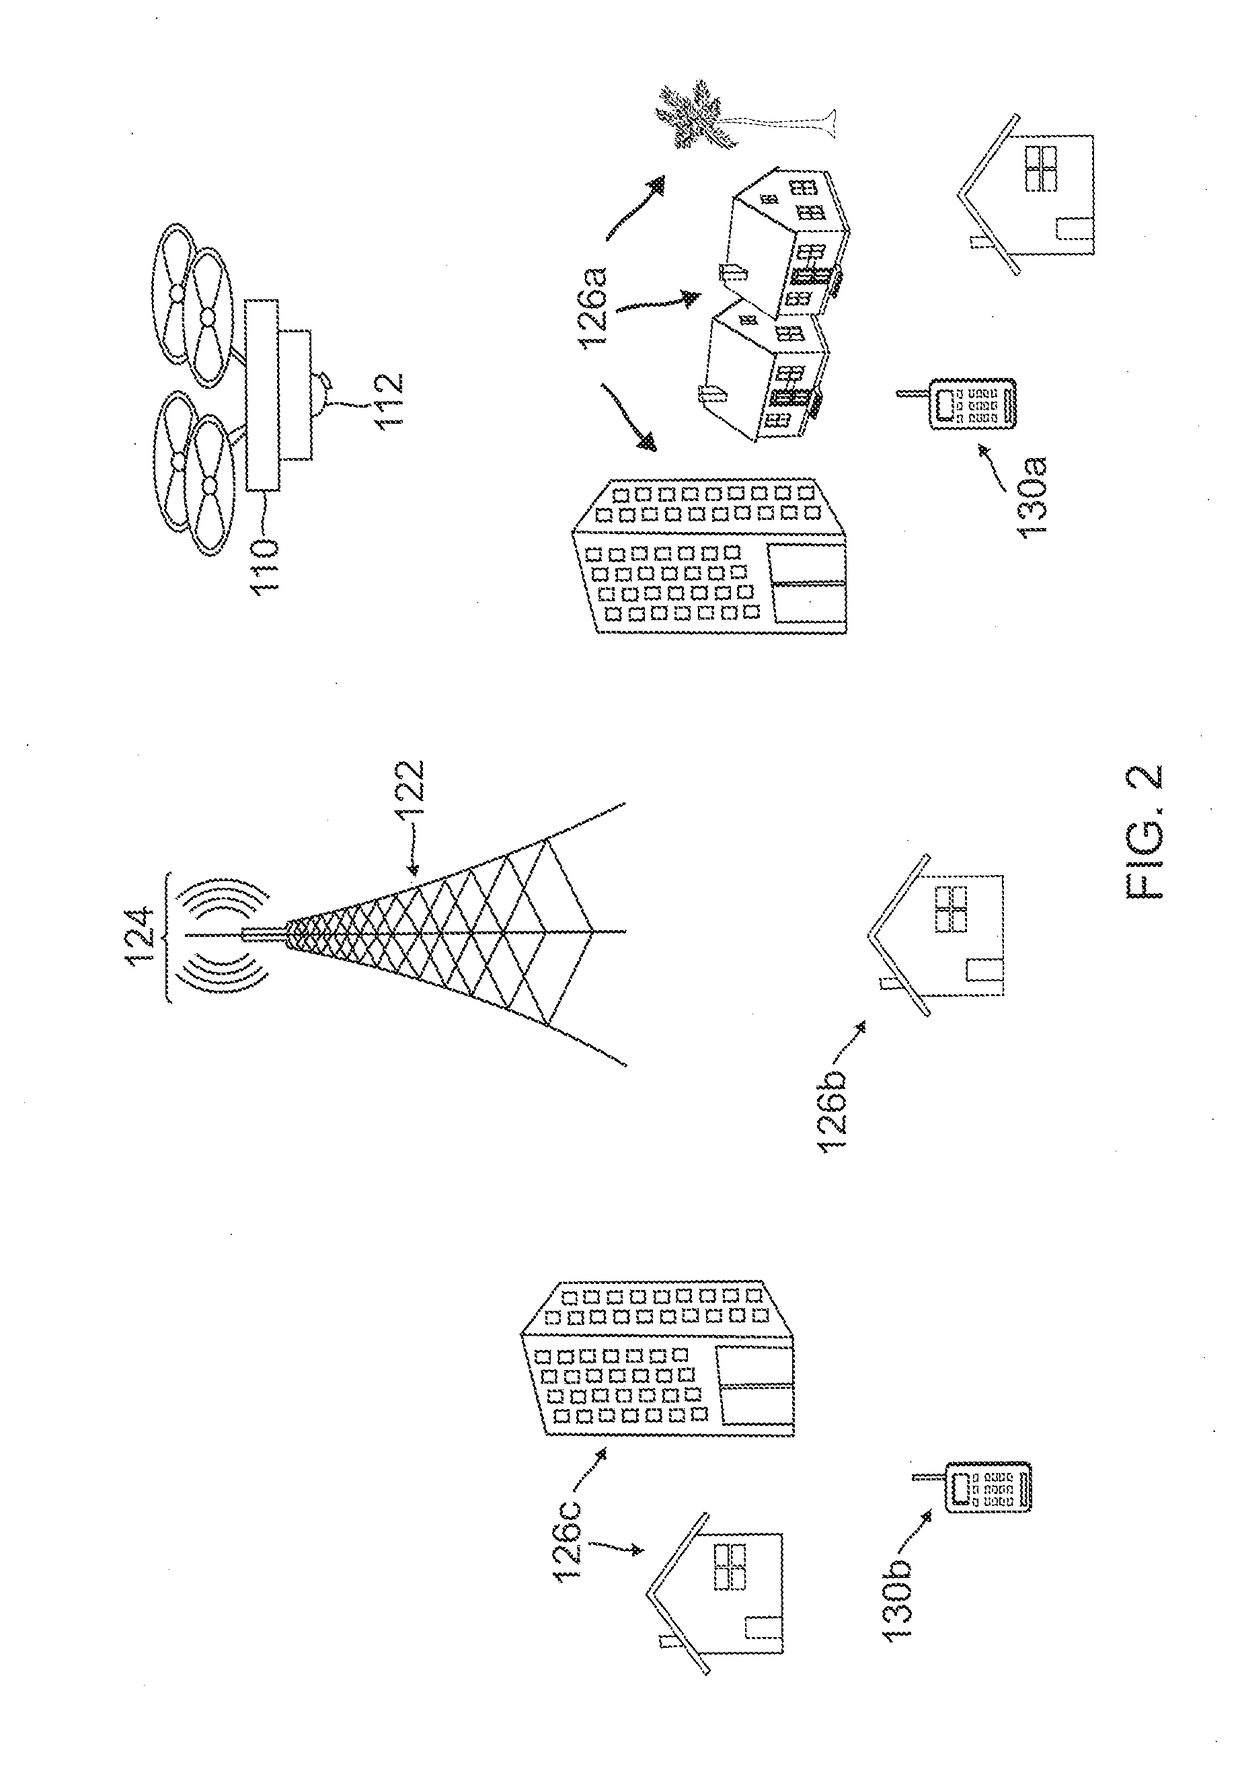 Dynamic shielding system of cellular signals for an antenna of an unmanned aerial vehicle